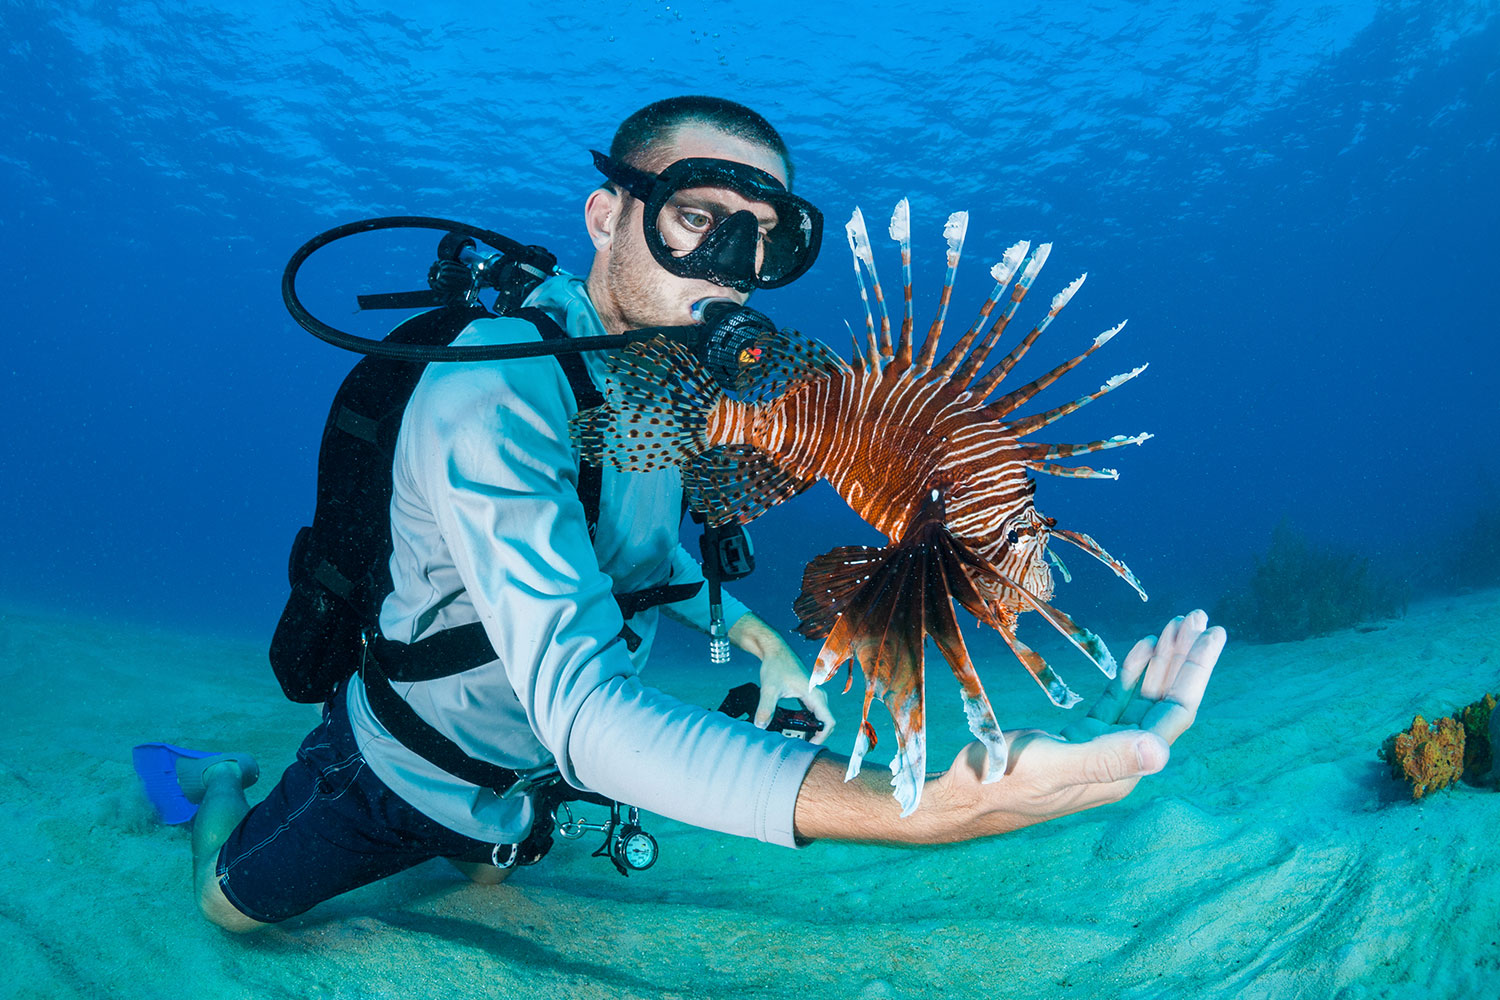 Diver holds arm out around lionfish underwater